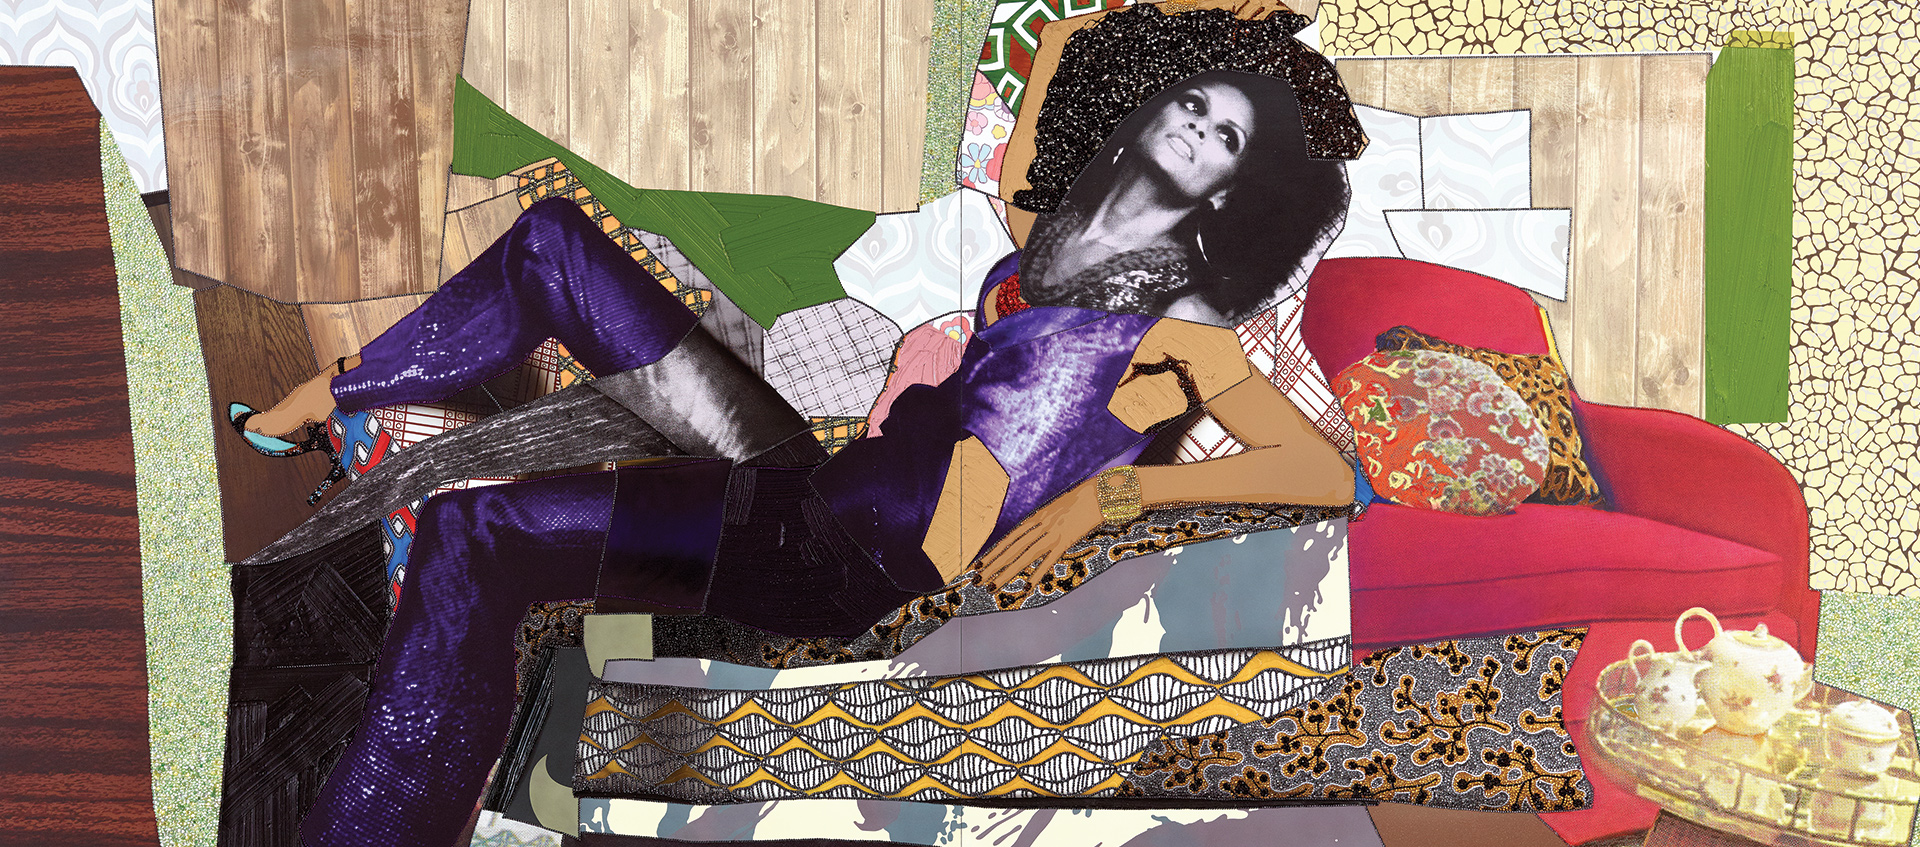 Artist Mickalene Thomas' Painting of a black woman posing on a couch with her foot raised in a collage of colorful materials